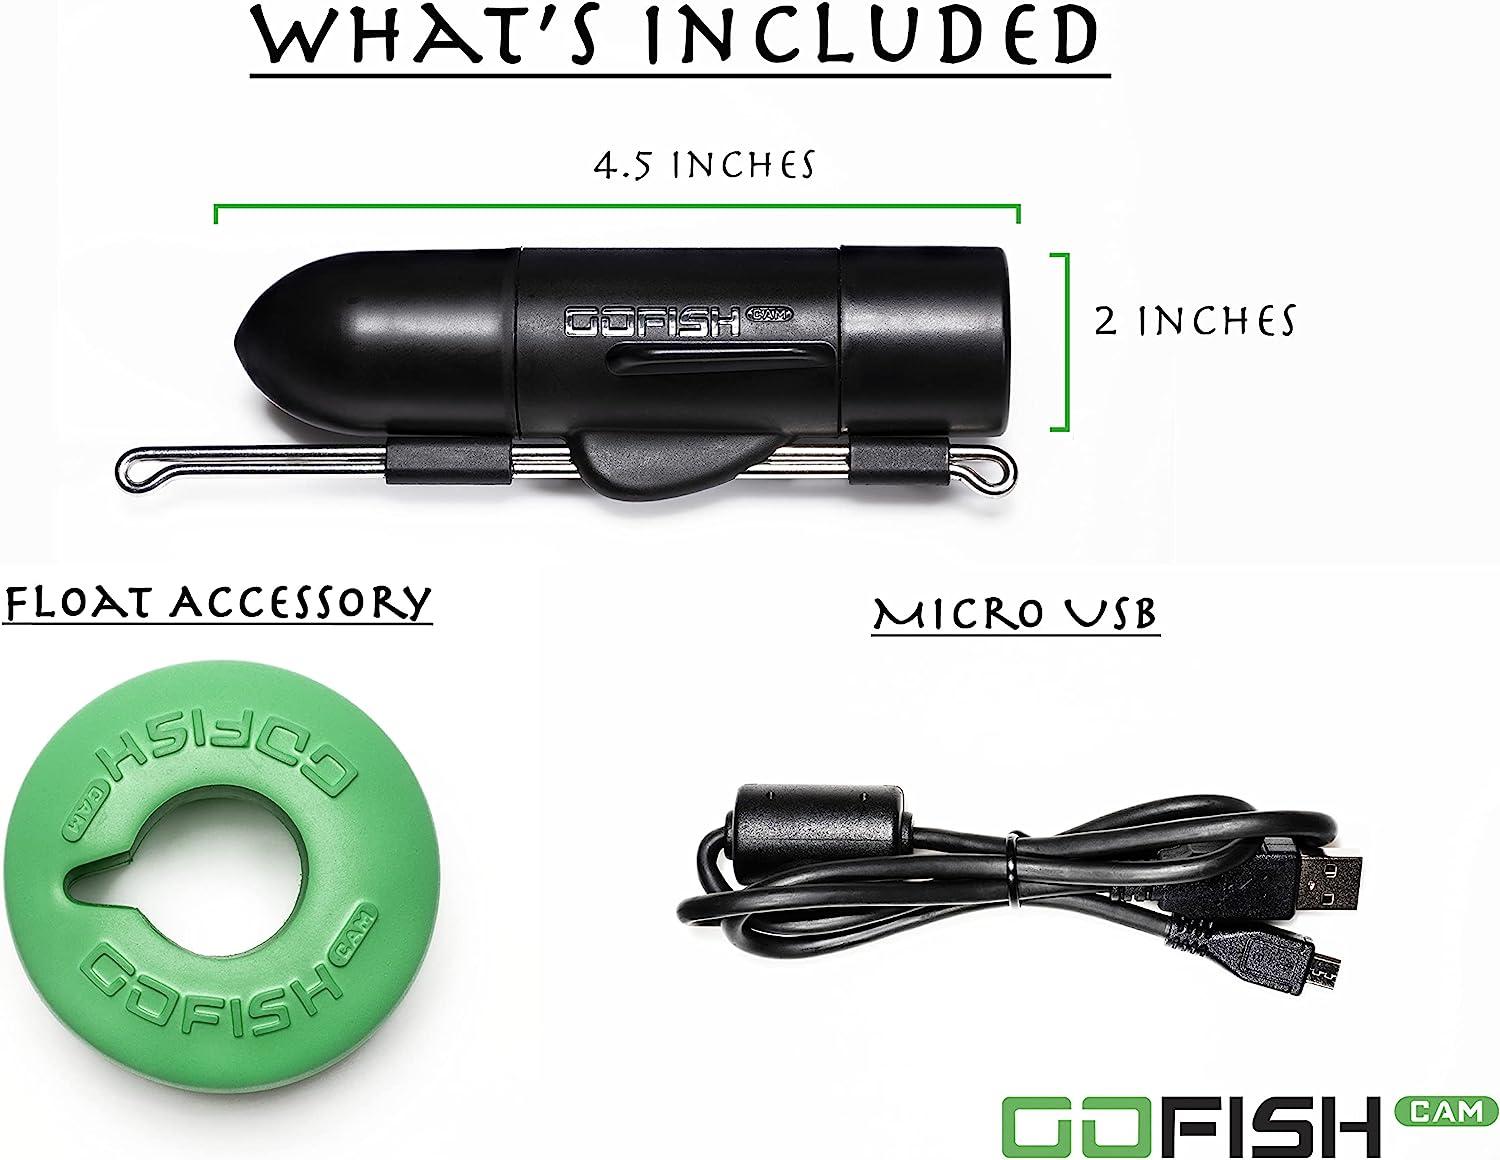 GoFish Cam- Full HD 1080p Wireless Underwater Fishing Camera, Black with  LED, App Compatible with iOS and Android